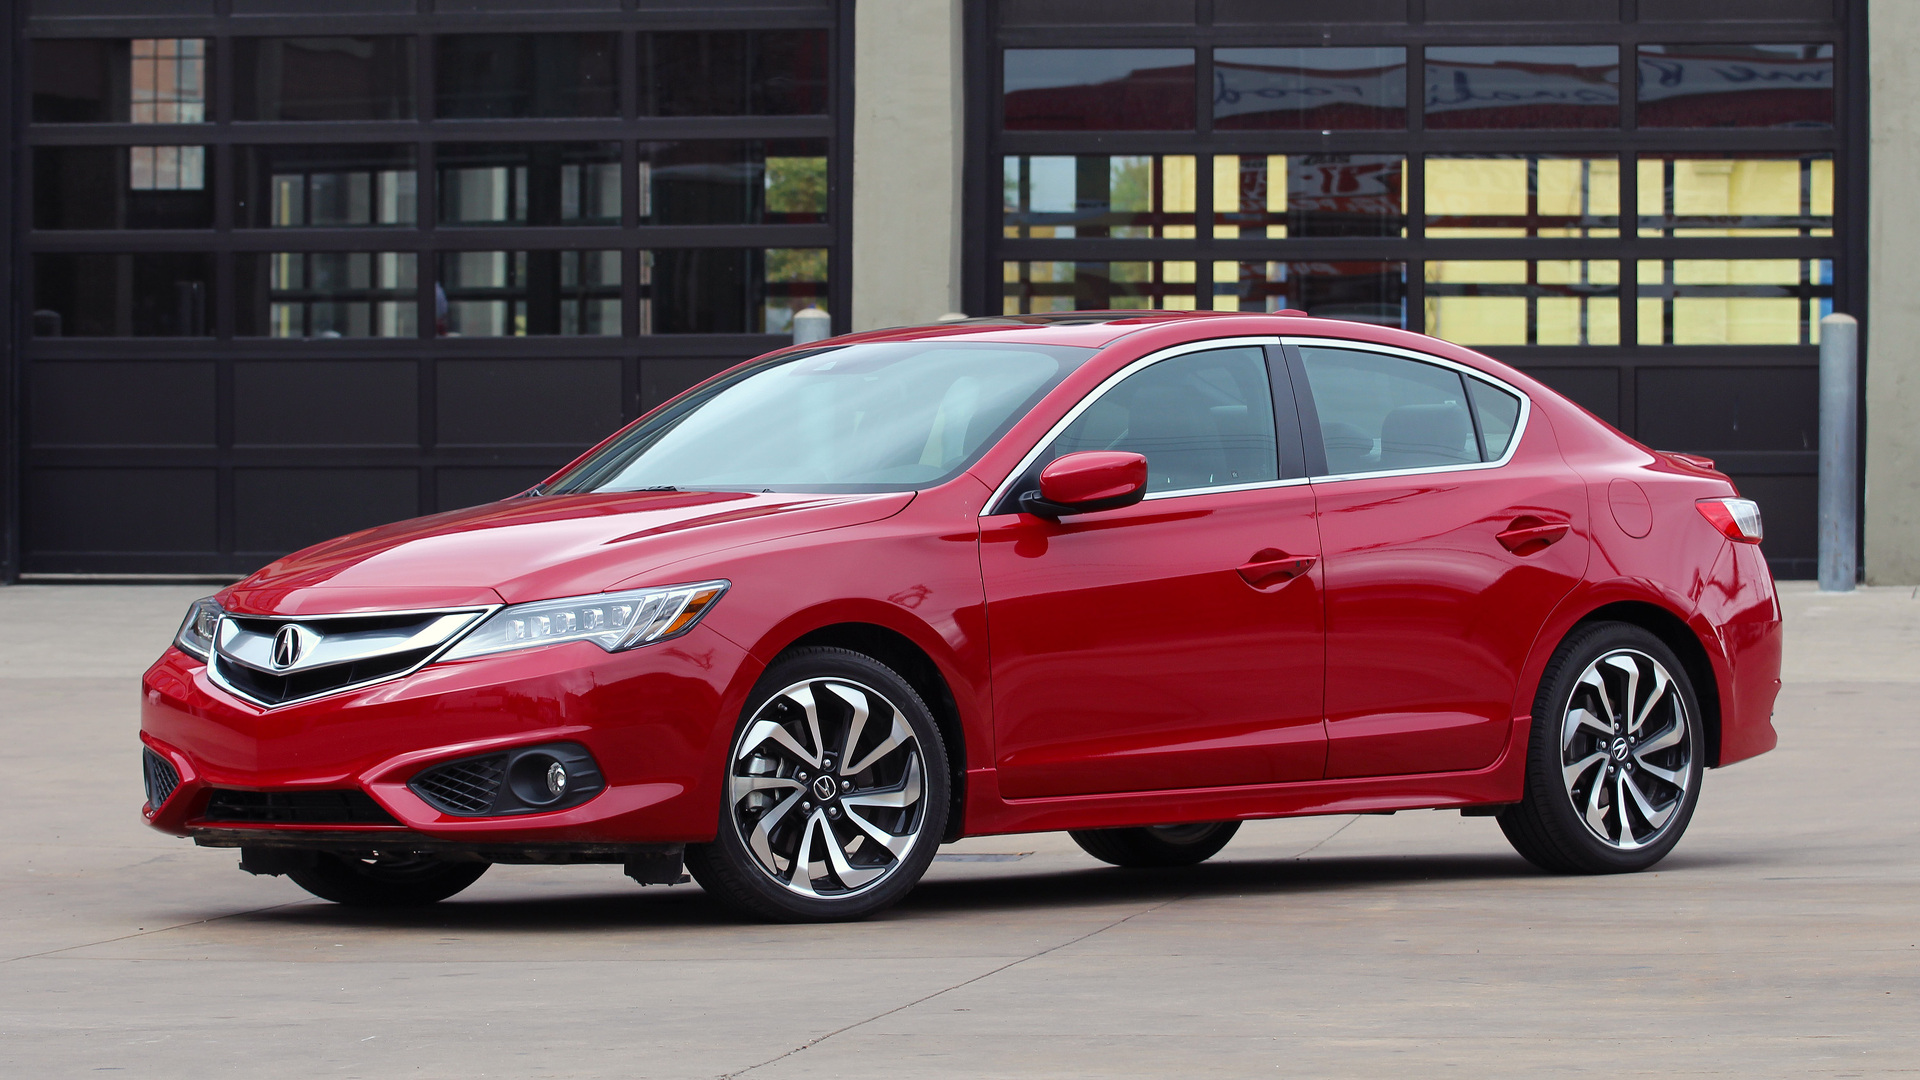 Review: 2017 Acura ILX